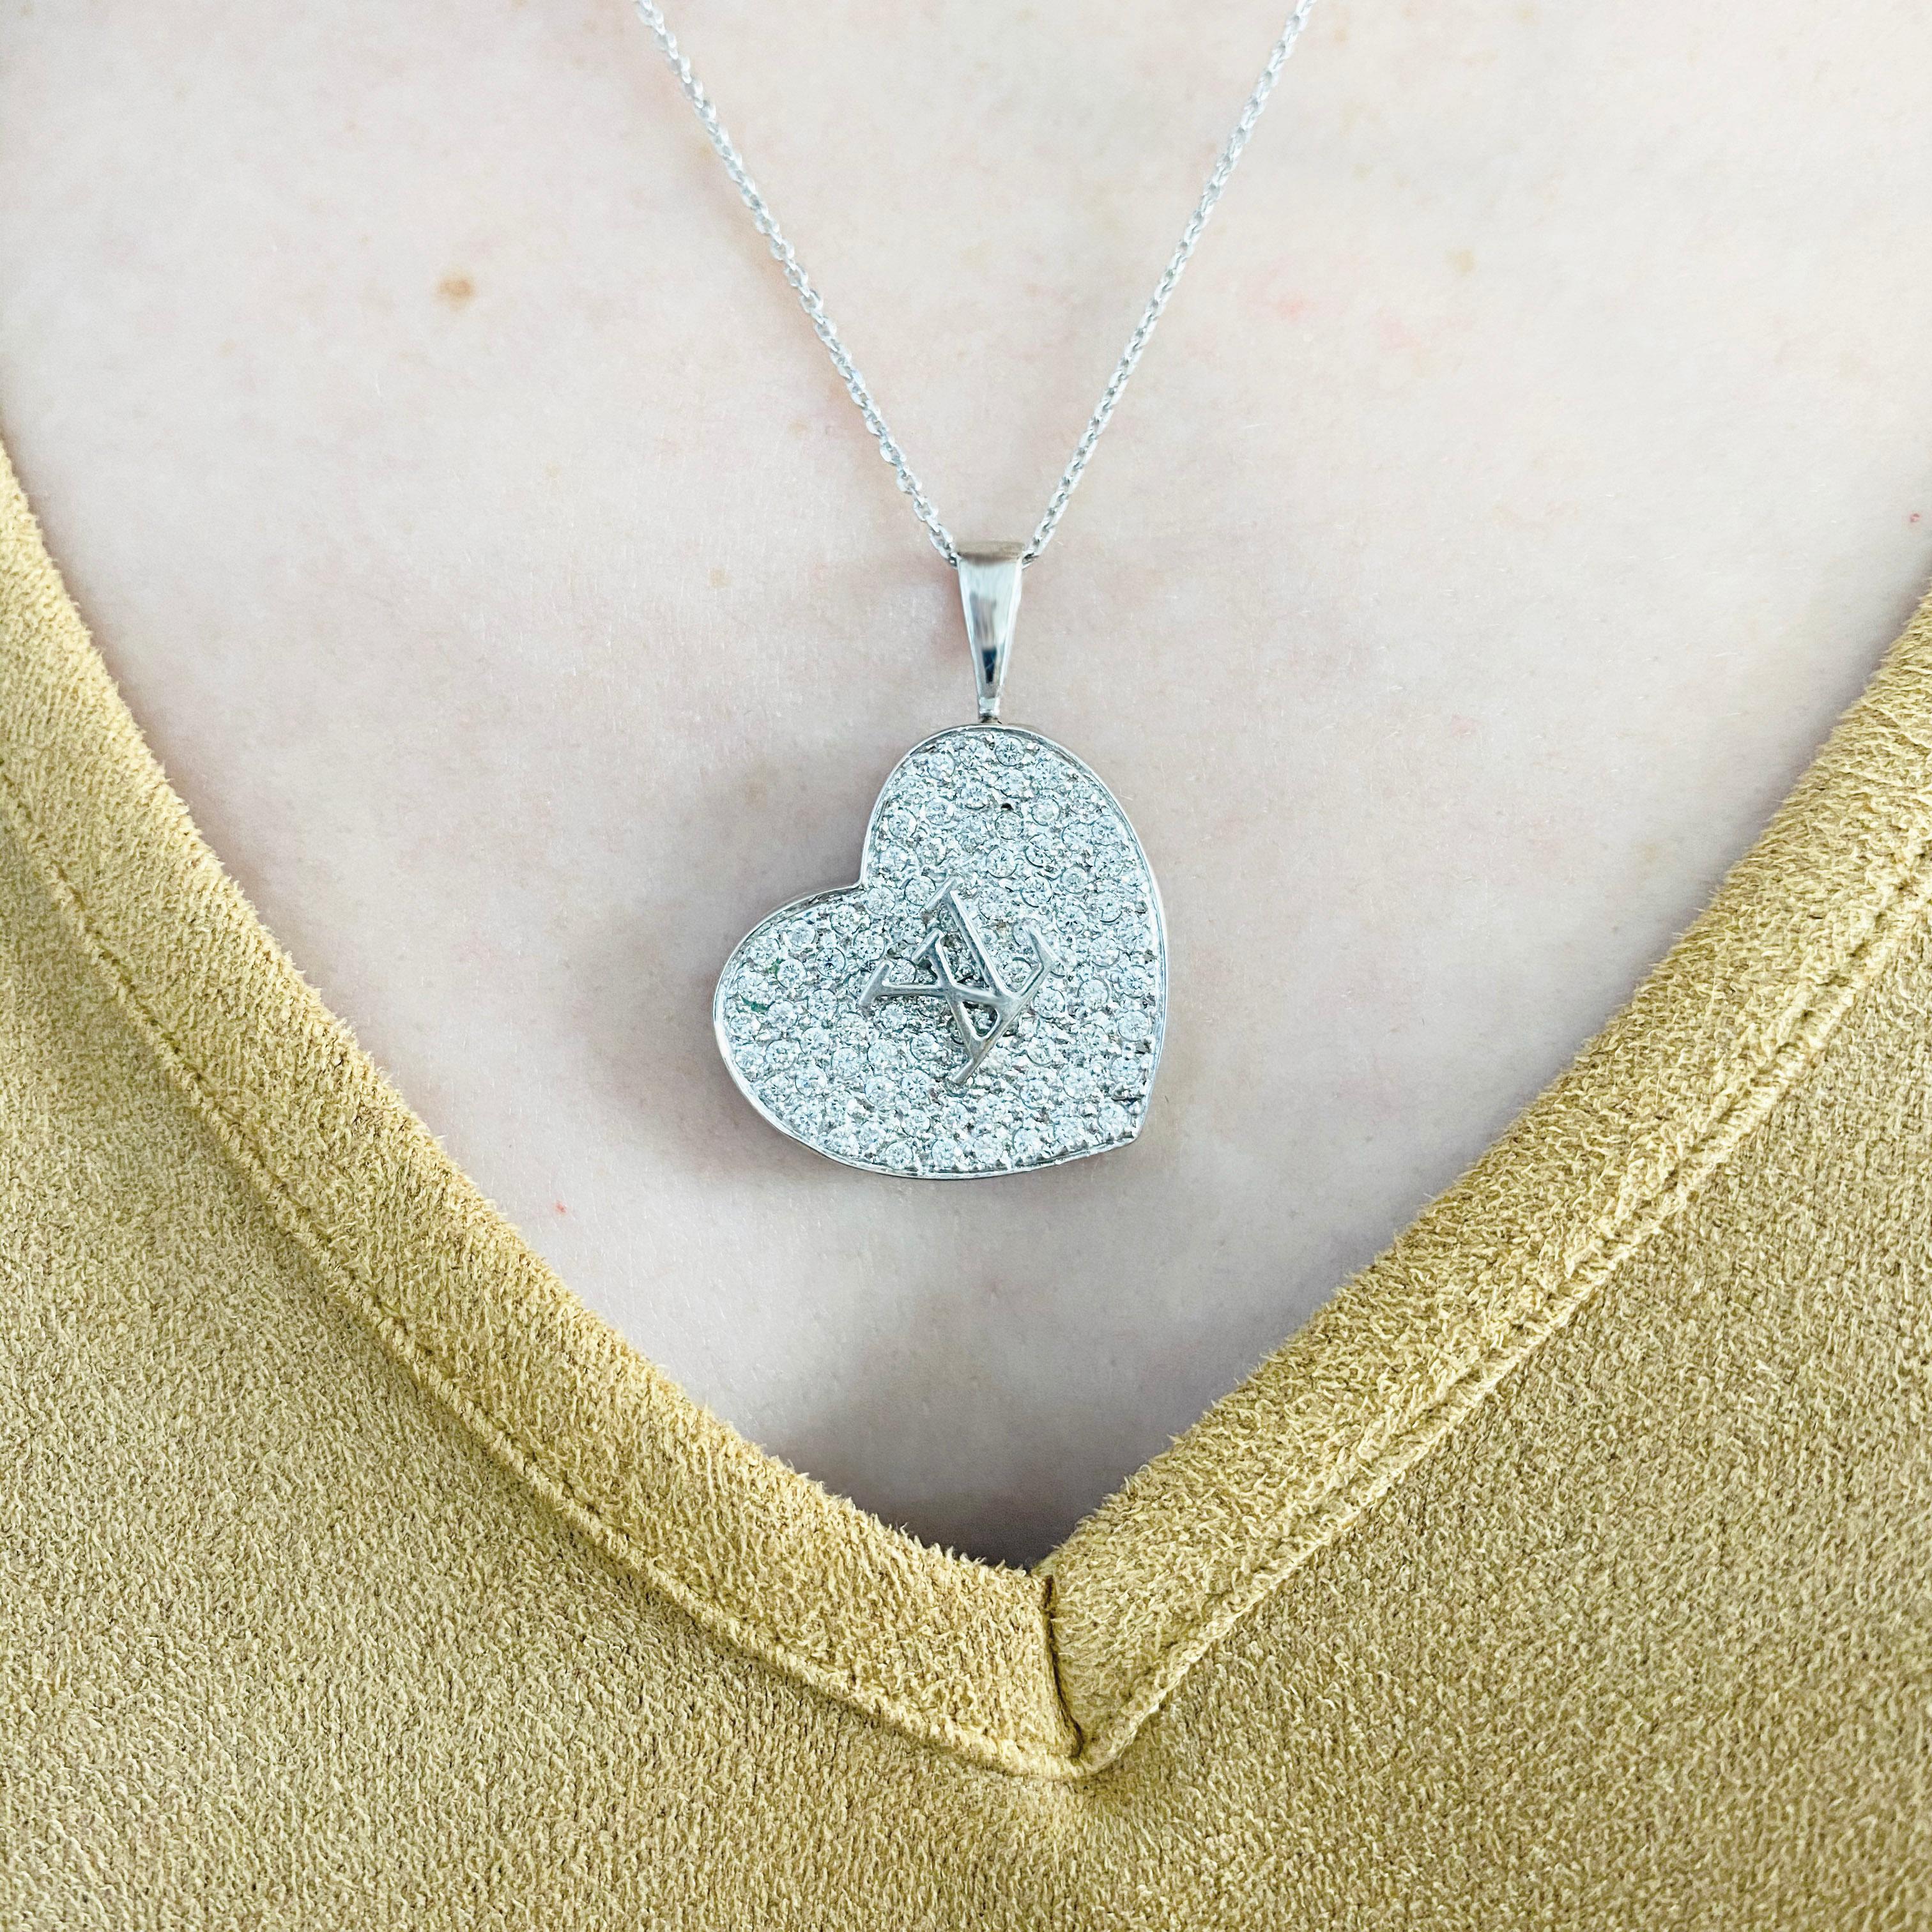 This gorgeous 18k white gold LV design heart locket pendant dripping with diamonds is the perfect mix between classic and trendy! This necklace is very fashionable and can add a touch of style to any outfit, yet it is also classy enough to pair